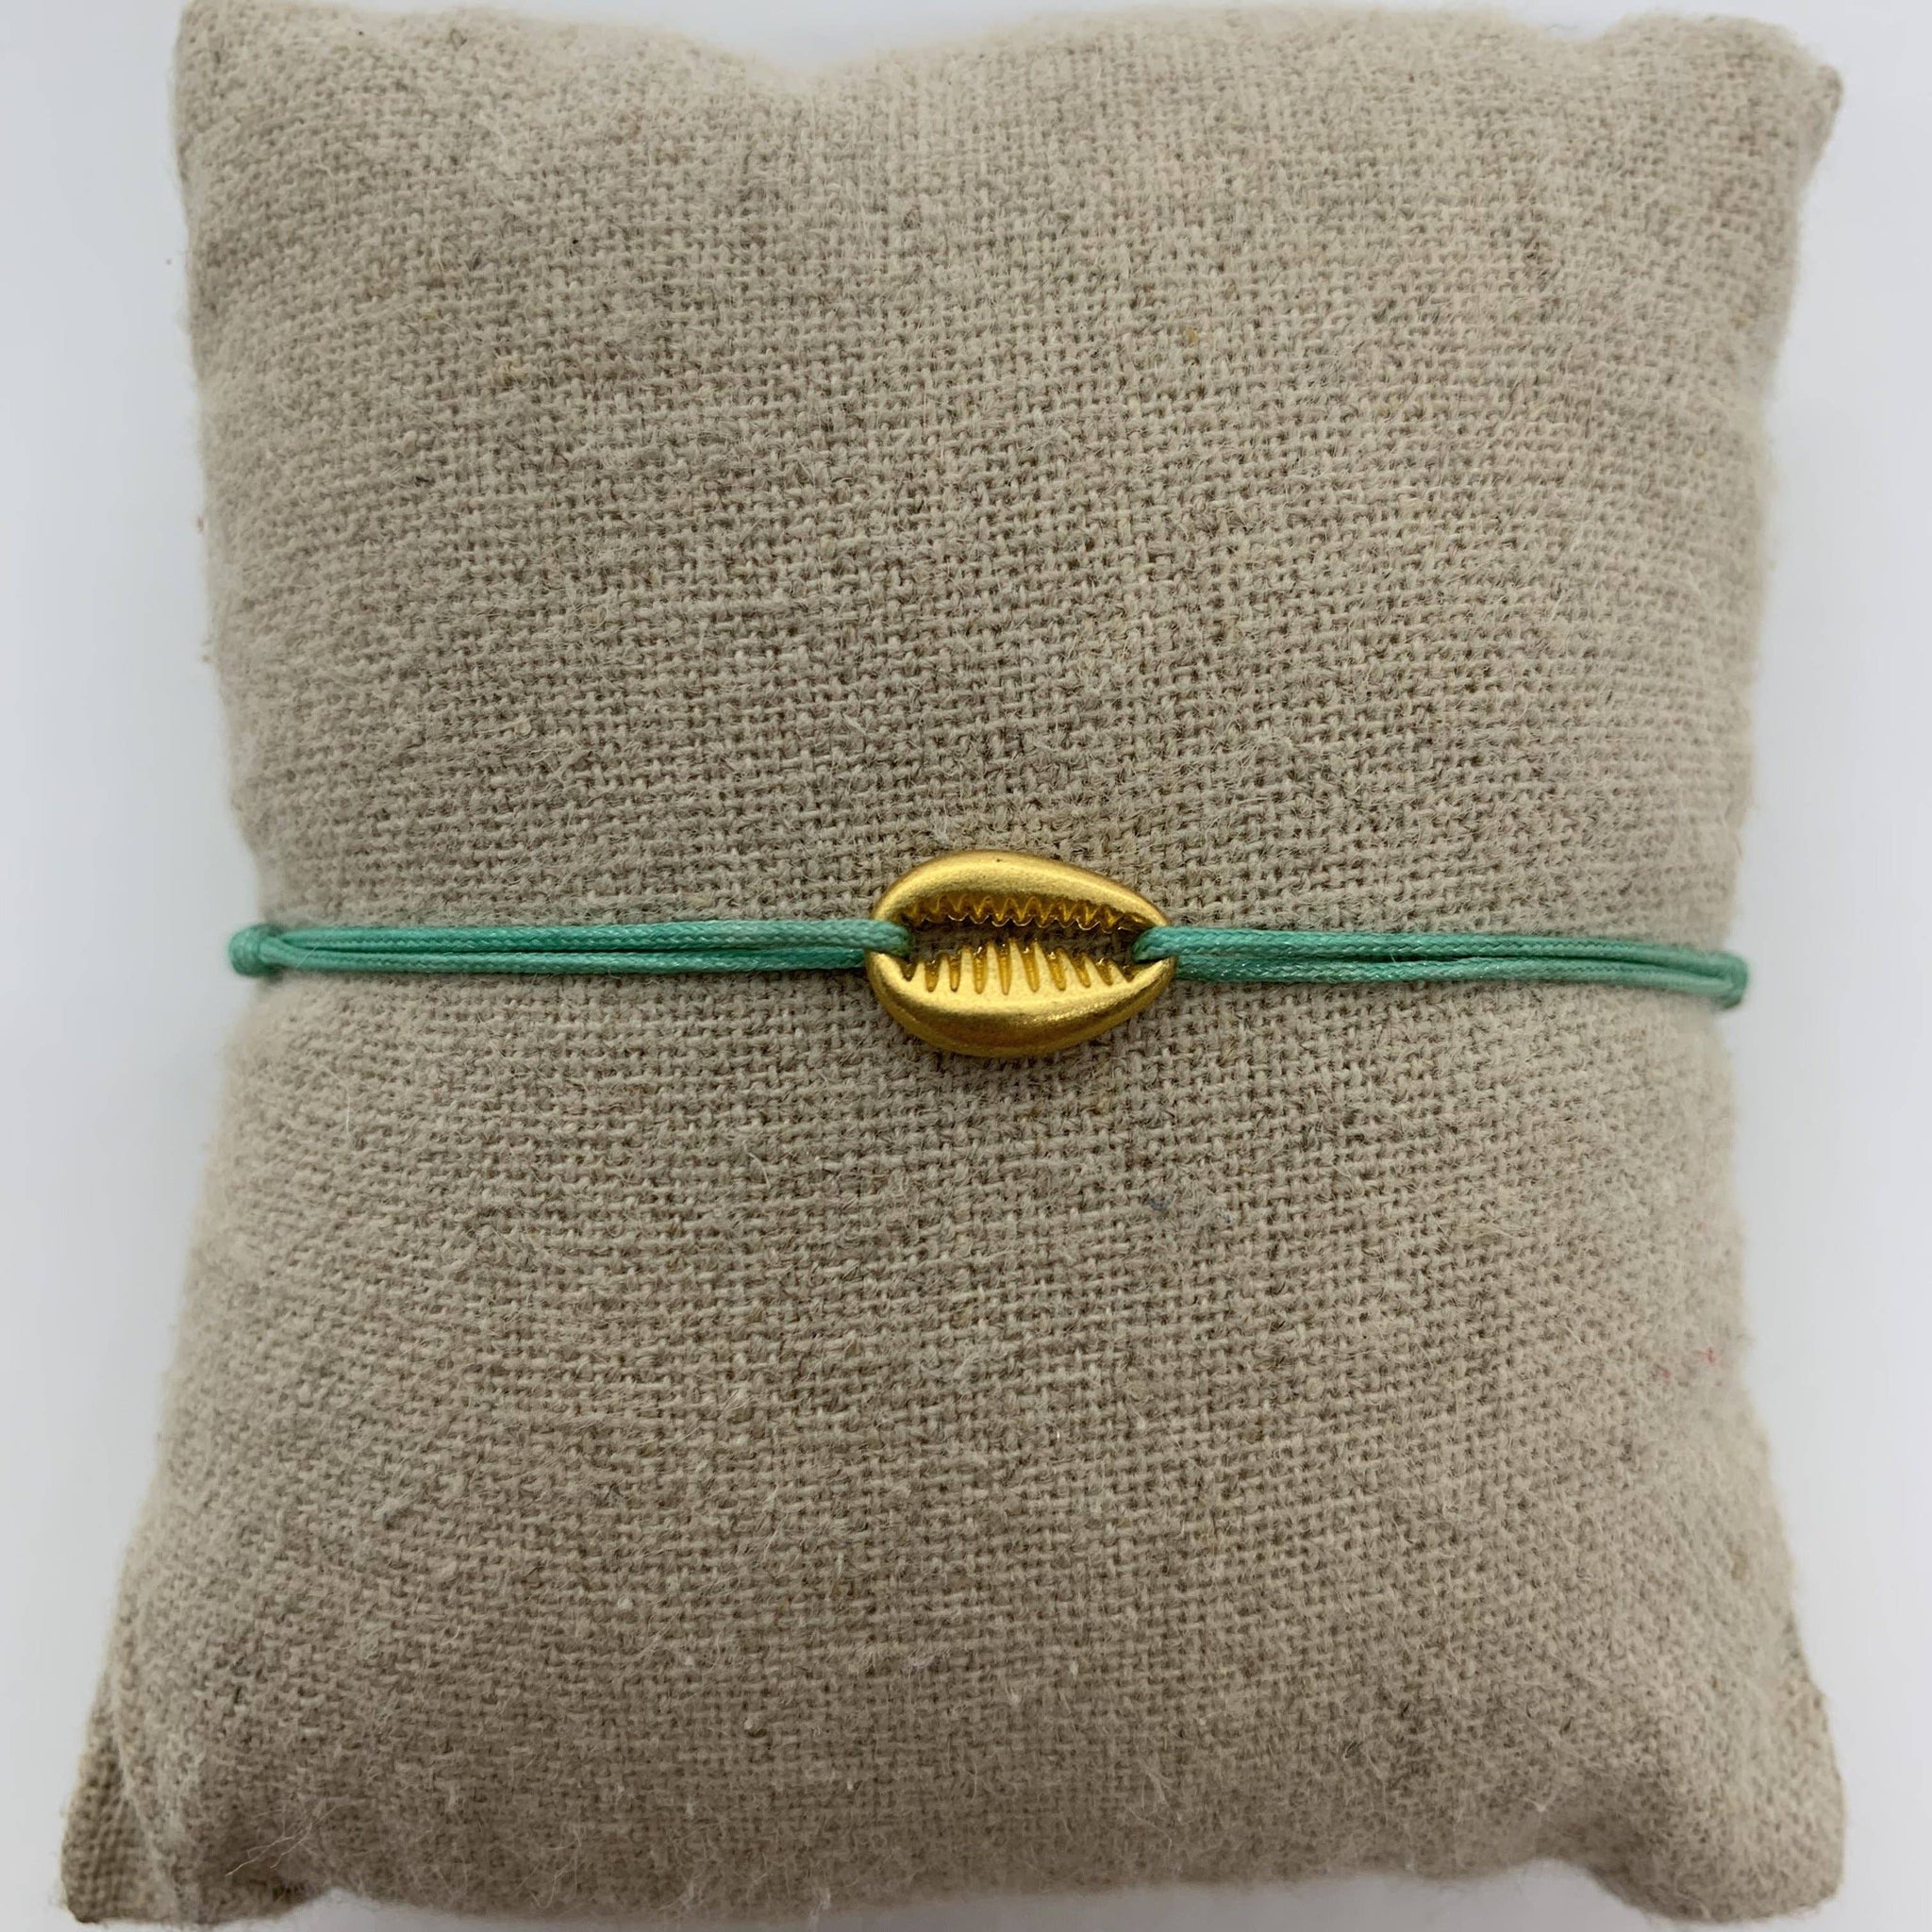 Bracelet with a SMALL golden metal shell